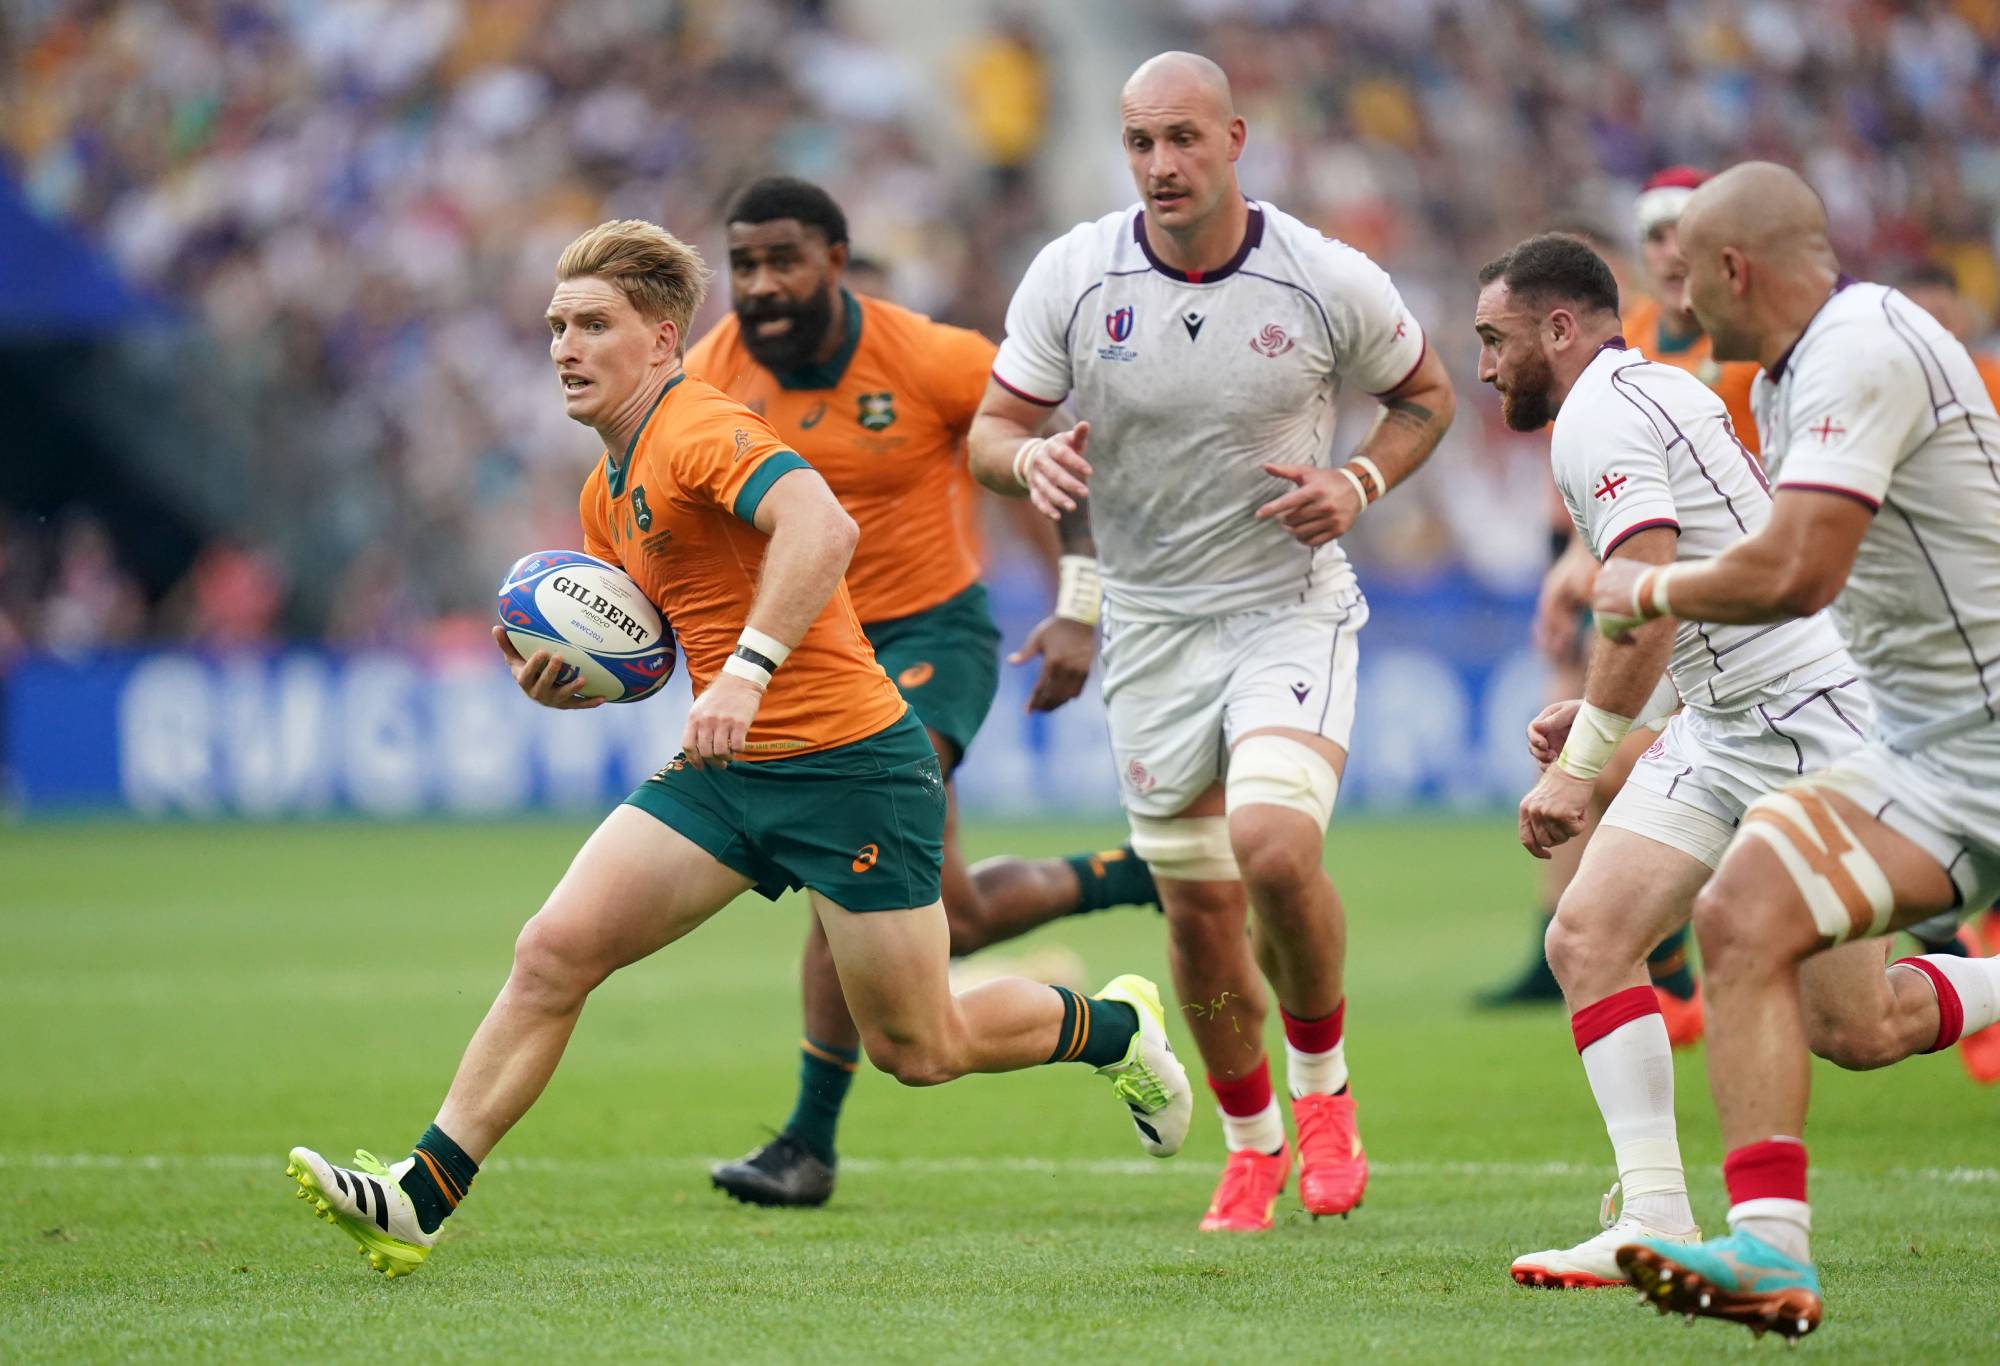 Australia's Tate McDermott (left) runs with the ball during the 2023 Rugby World Cup Pool C match at the Stade de France, Paris. Picture date: Saturday September 9, 2023. (Photo by Adam Davy/PA Images via Getty Images)